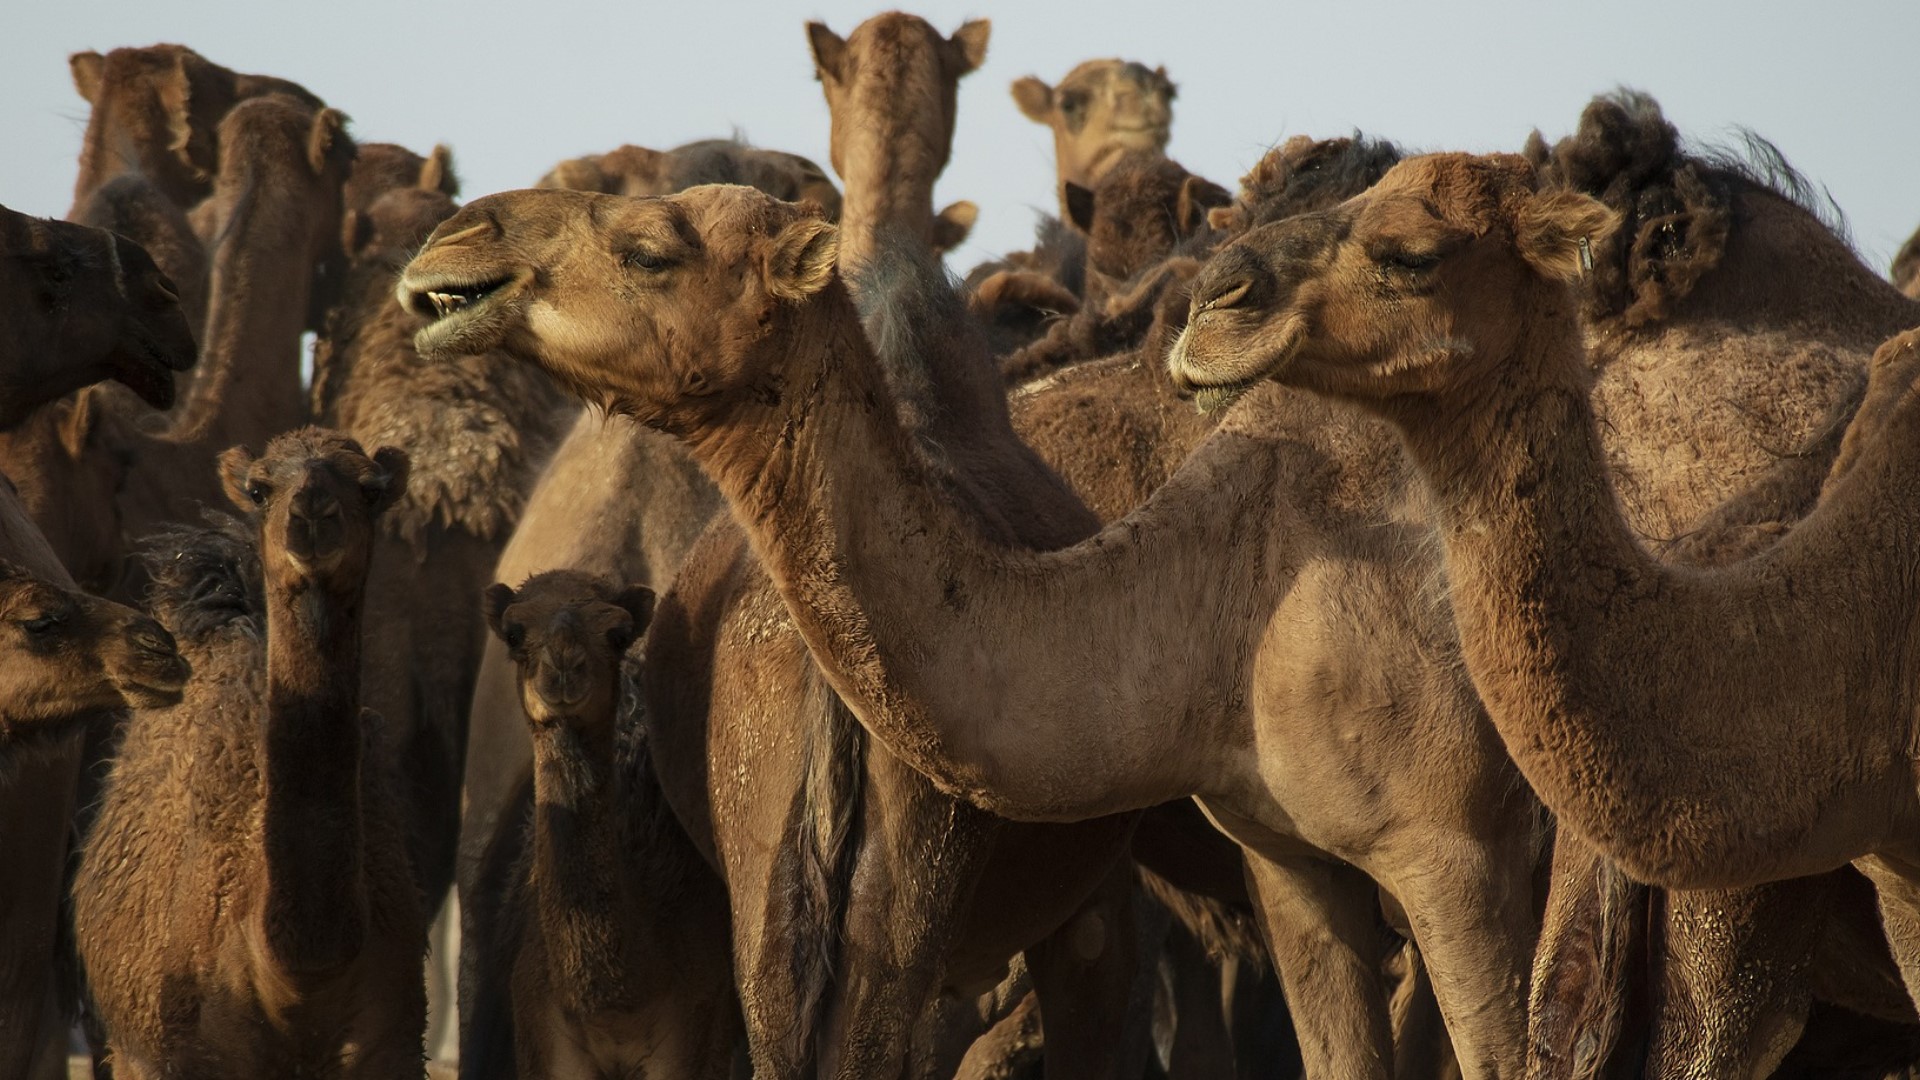 The camel corps helps teach the history of the US Army Camel Experiment.